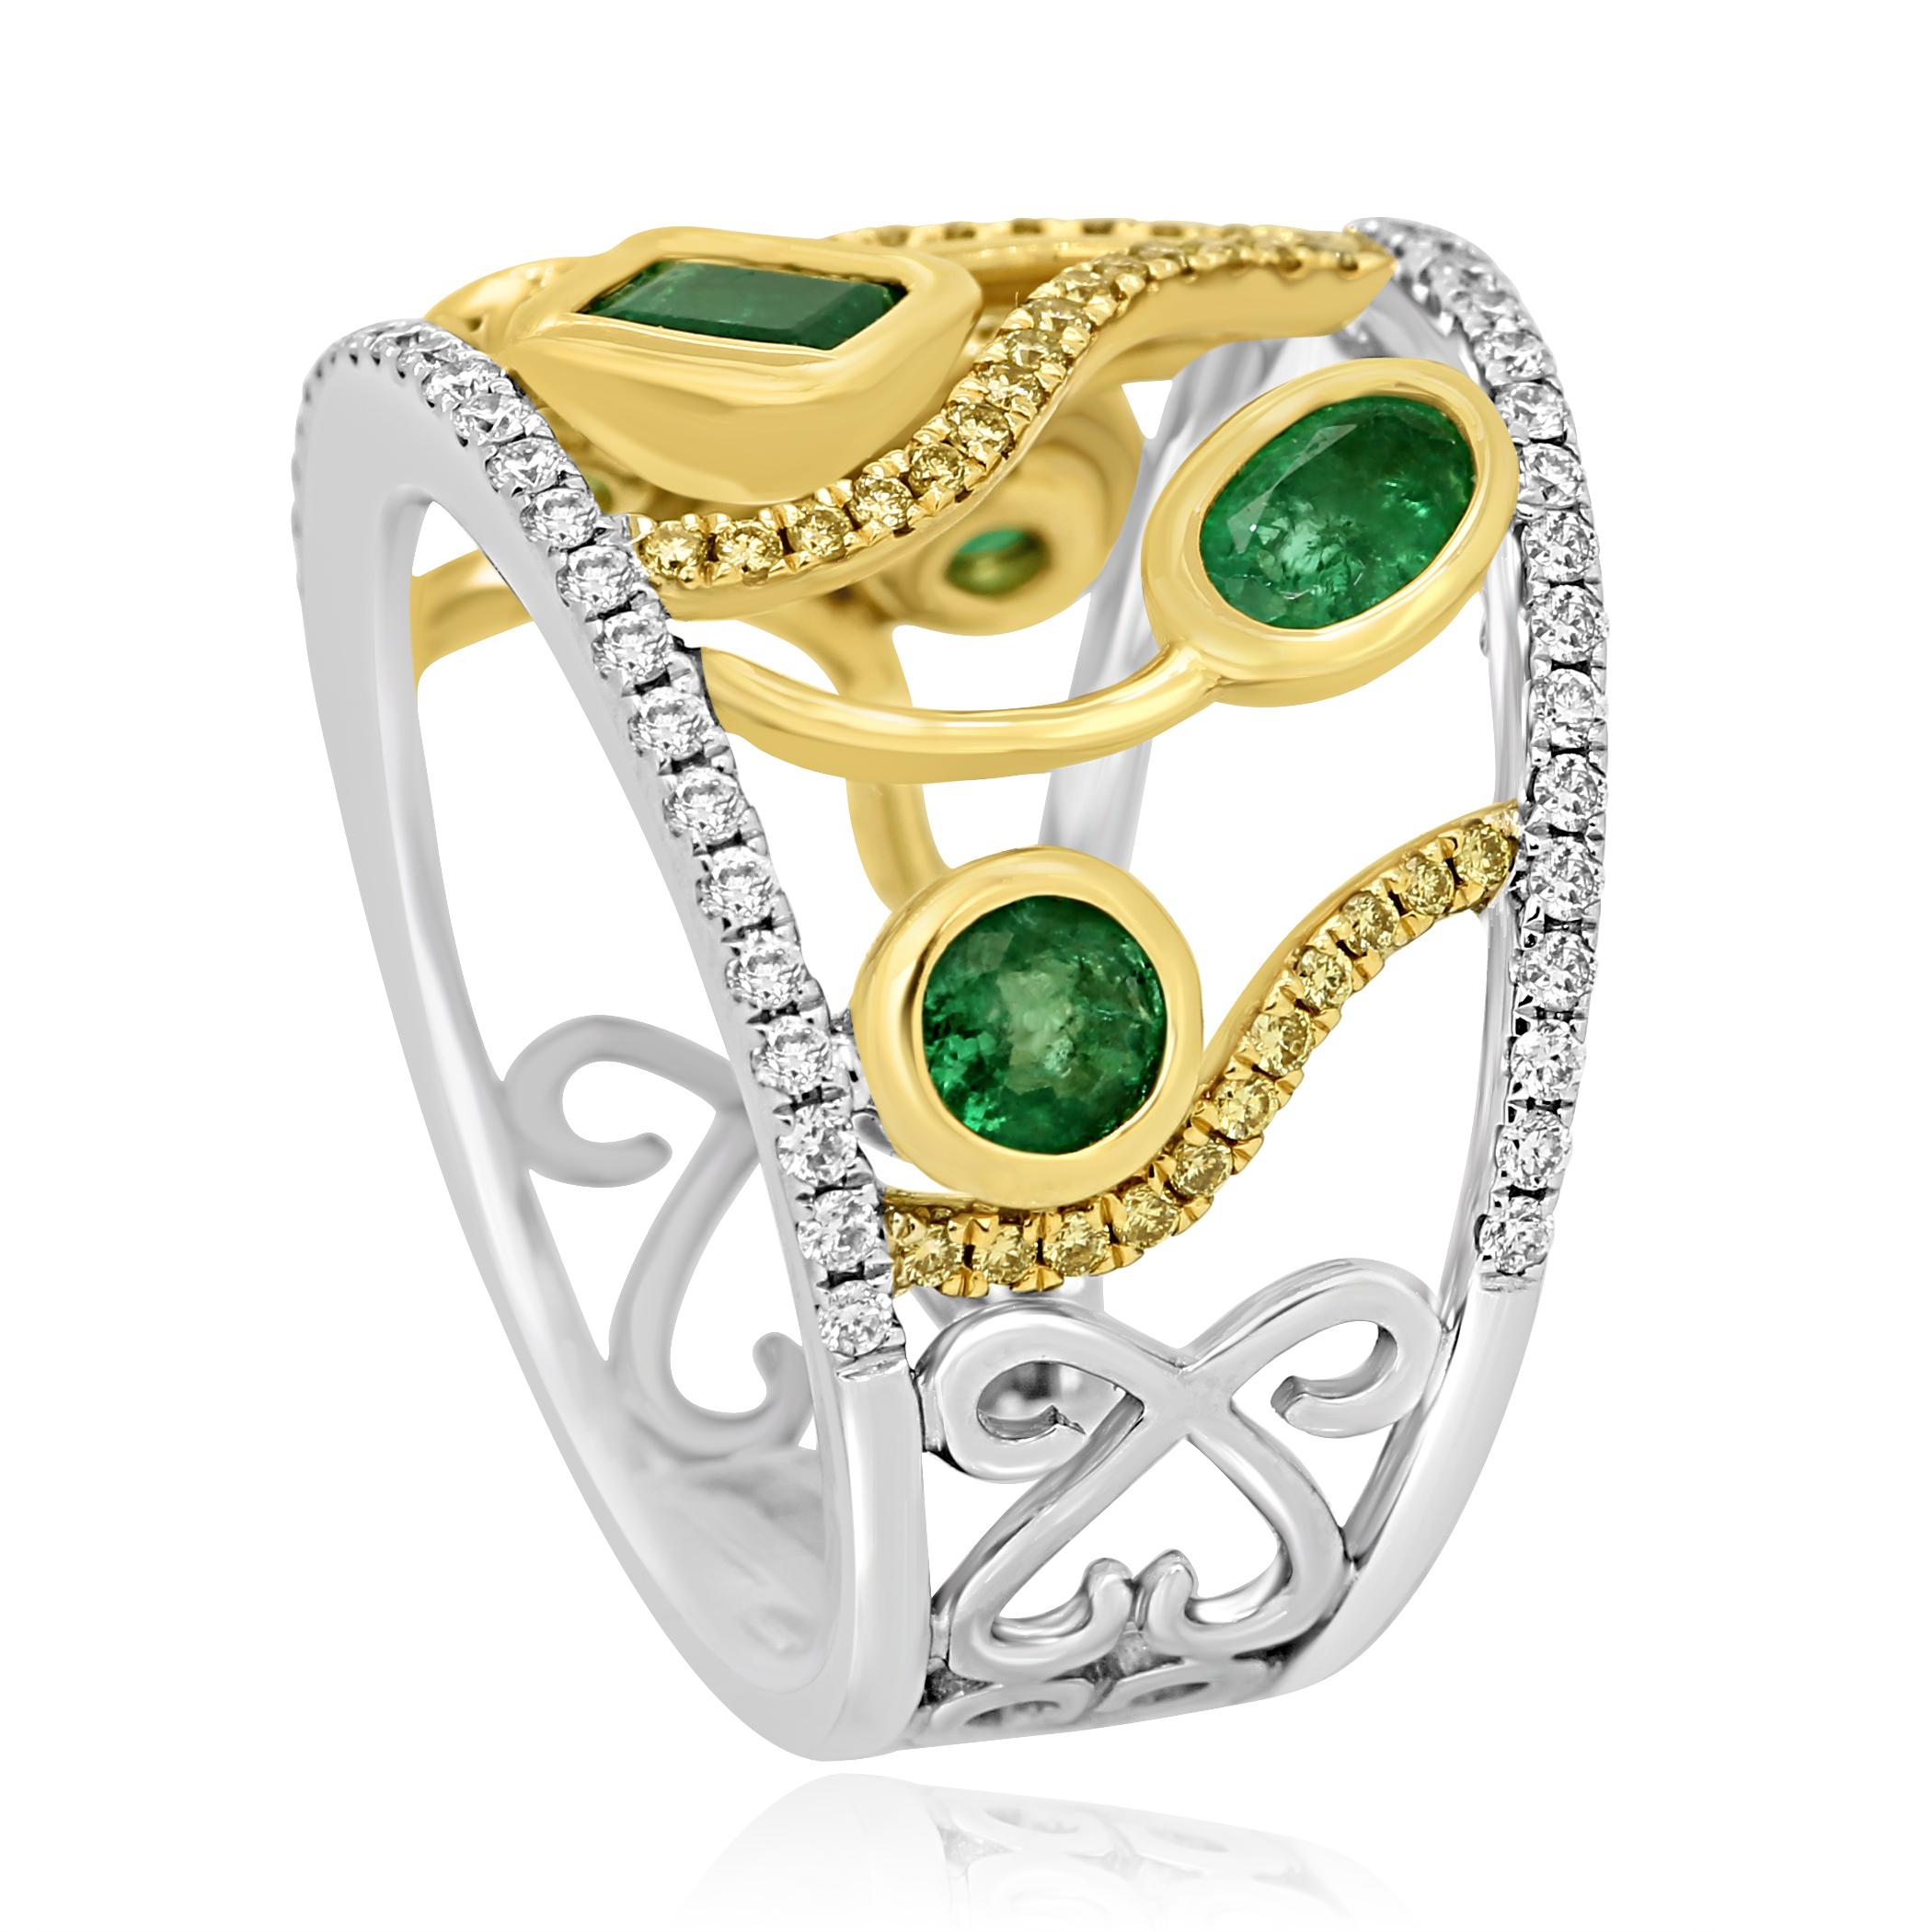 Oval Cut Emerald Fancy Yellow White Diamond Two-Color Gold Cocktail Fashion Band Ring